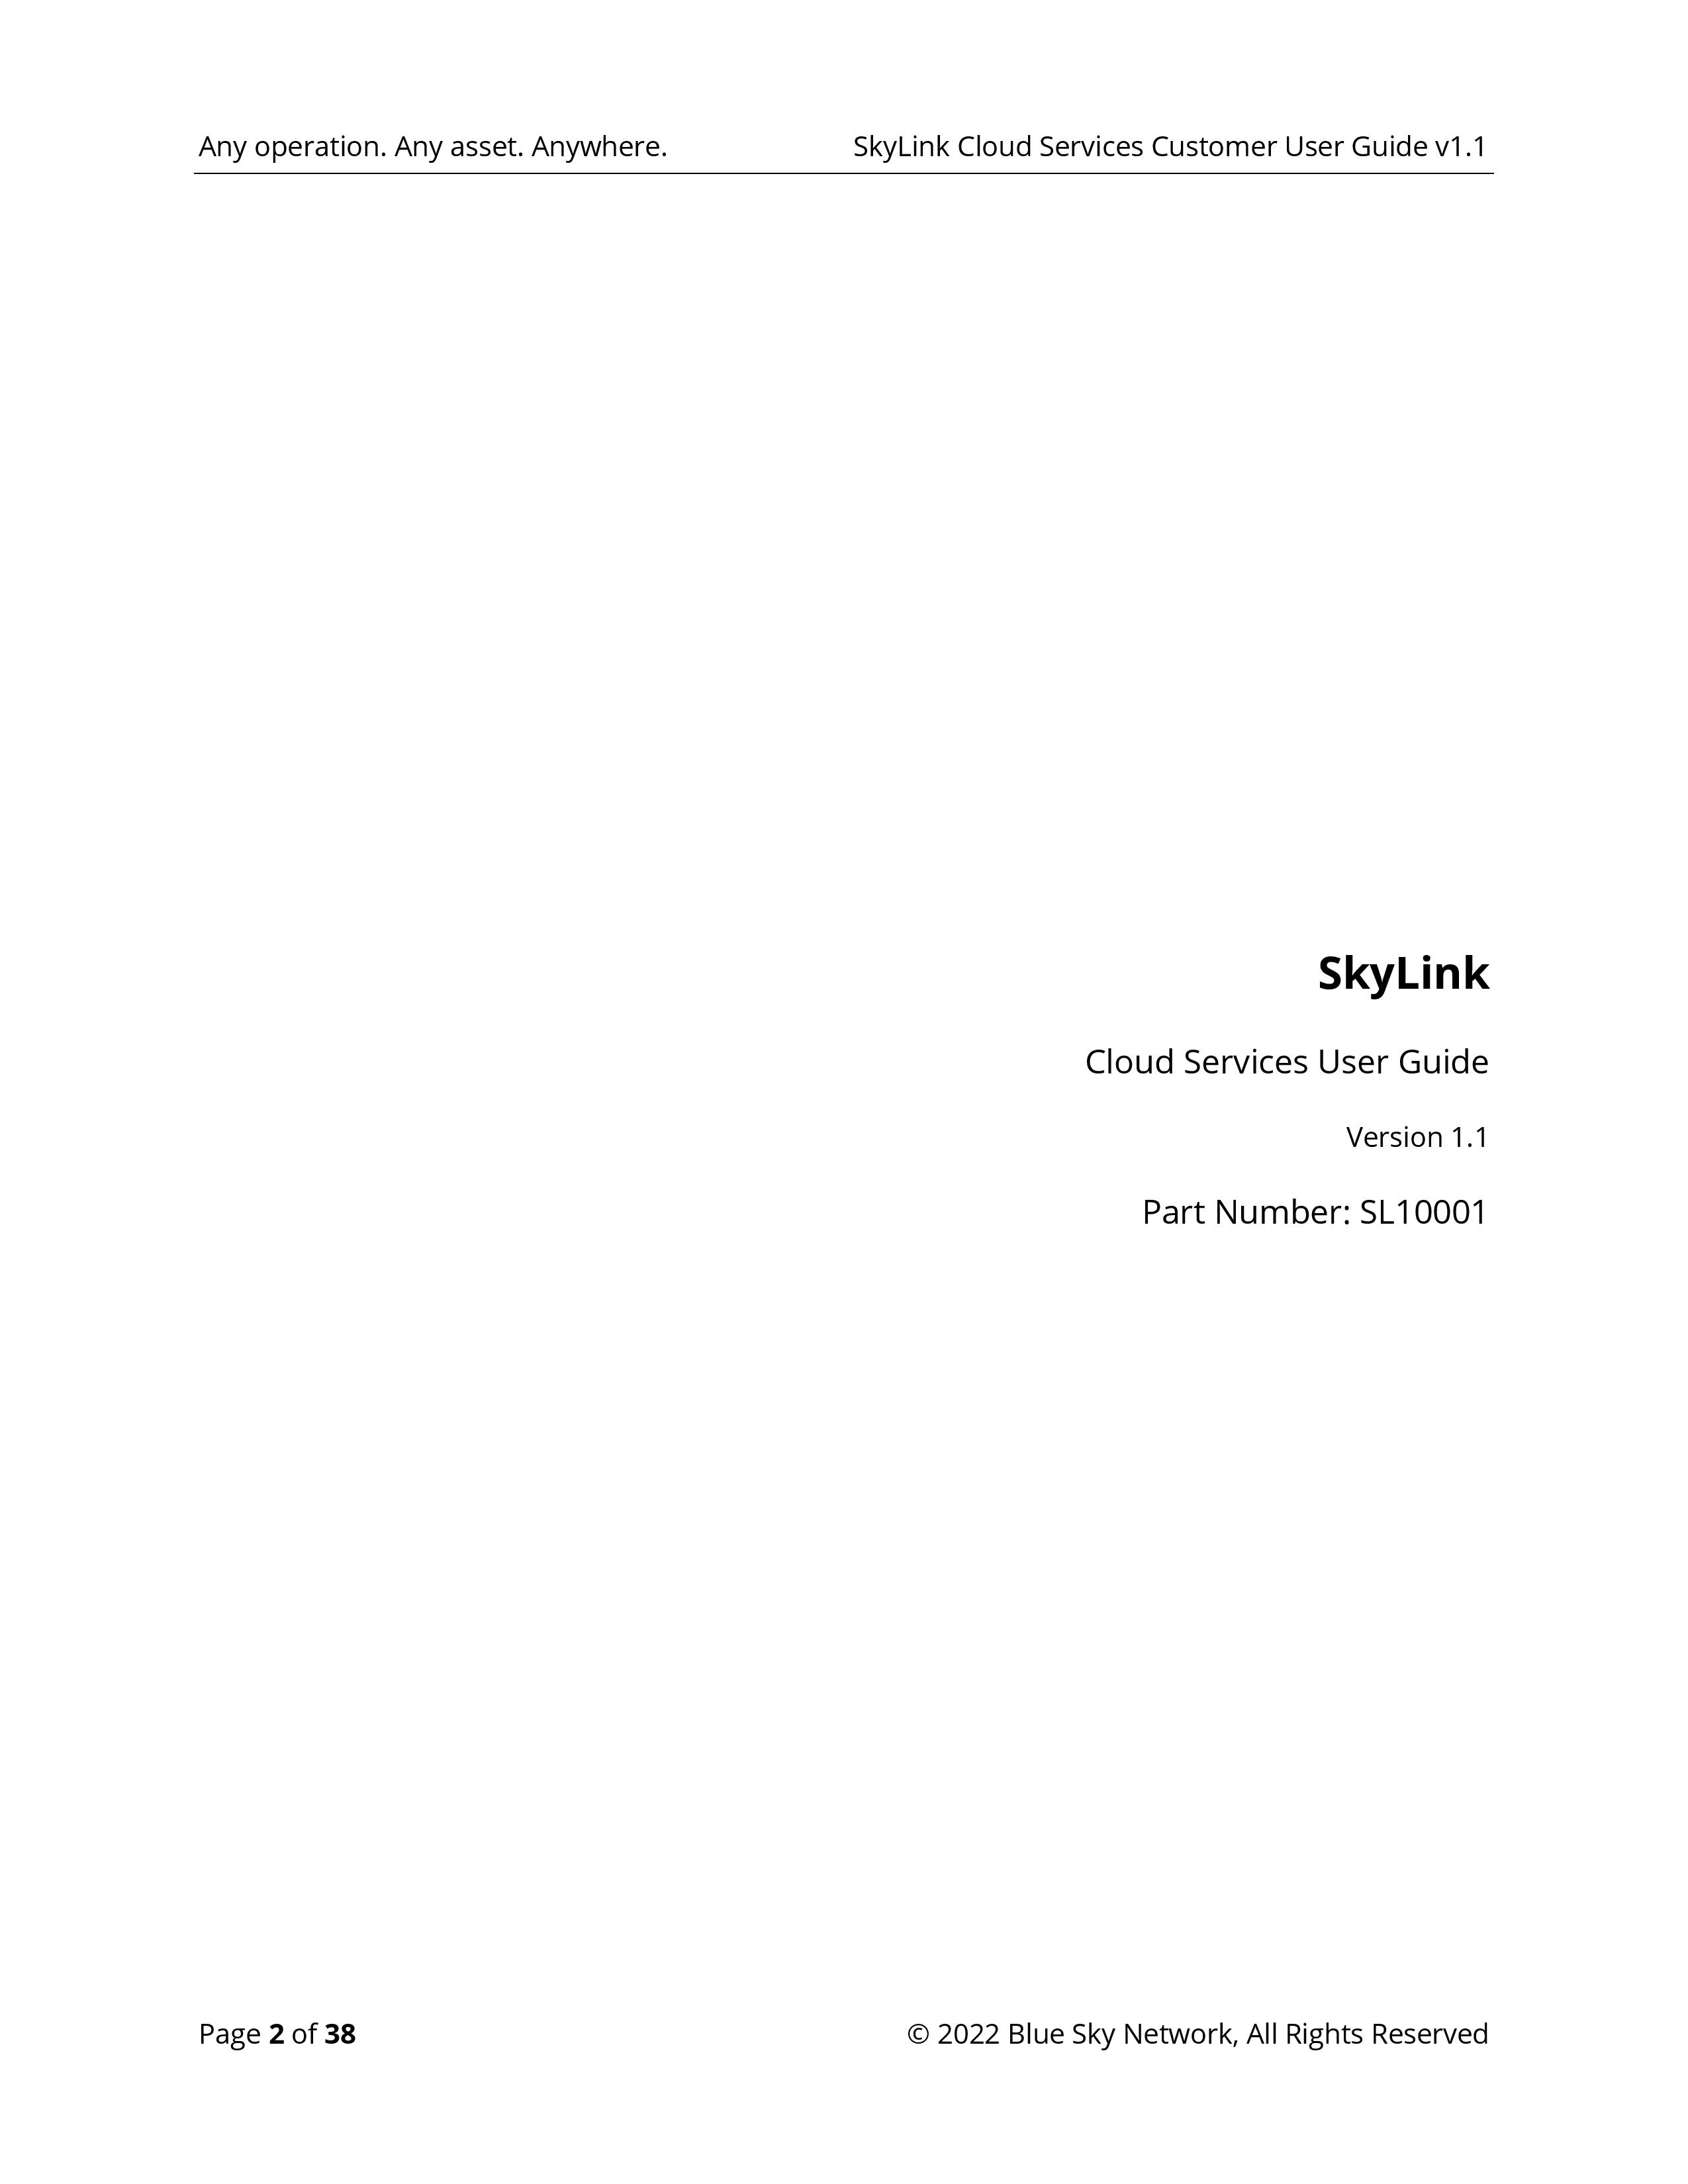 SkyLink-Cloud-Services-Customer-User-Guide-page-002.jpg